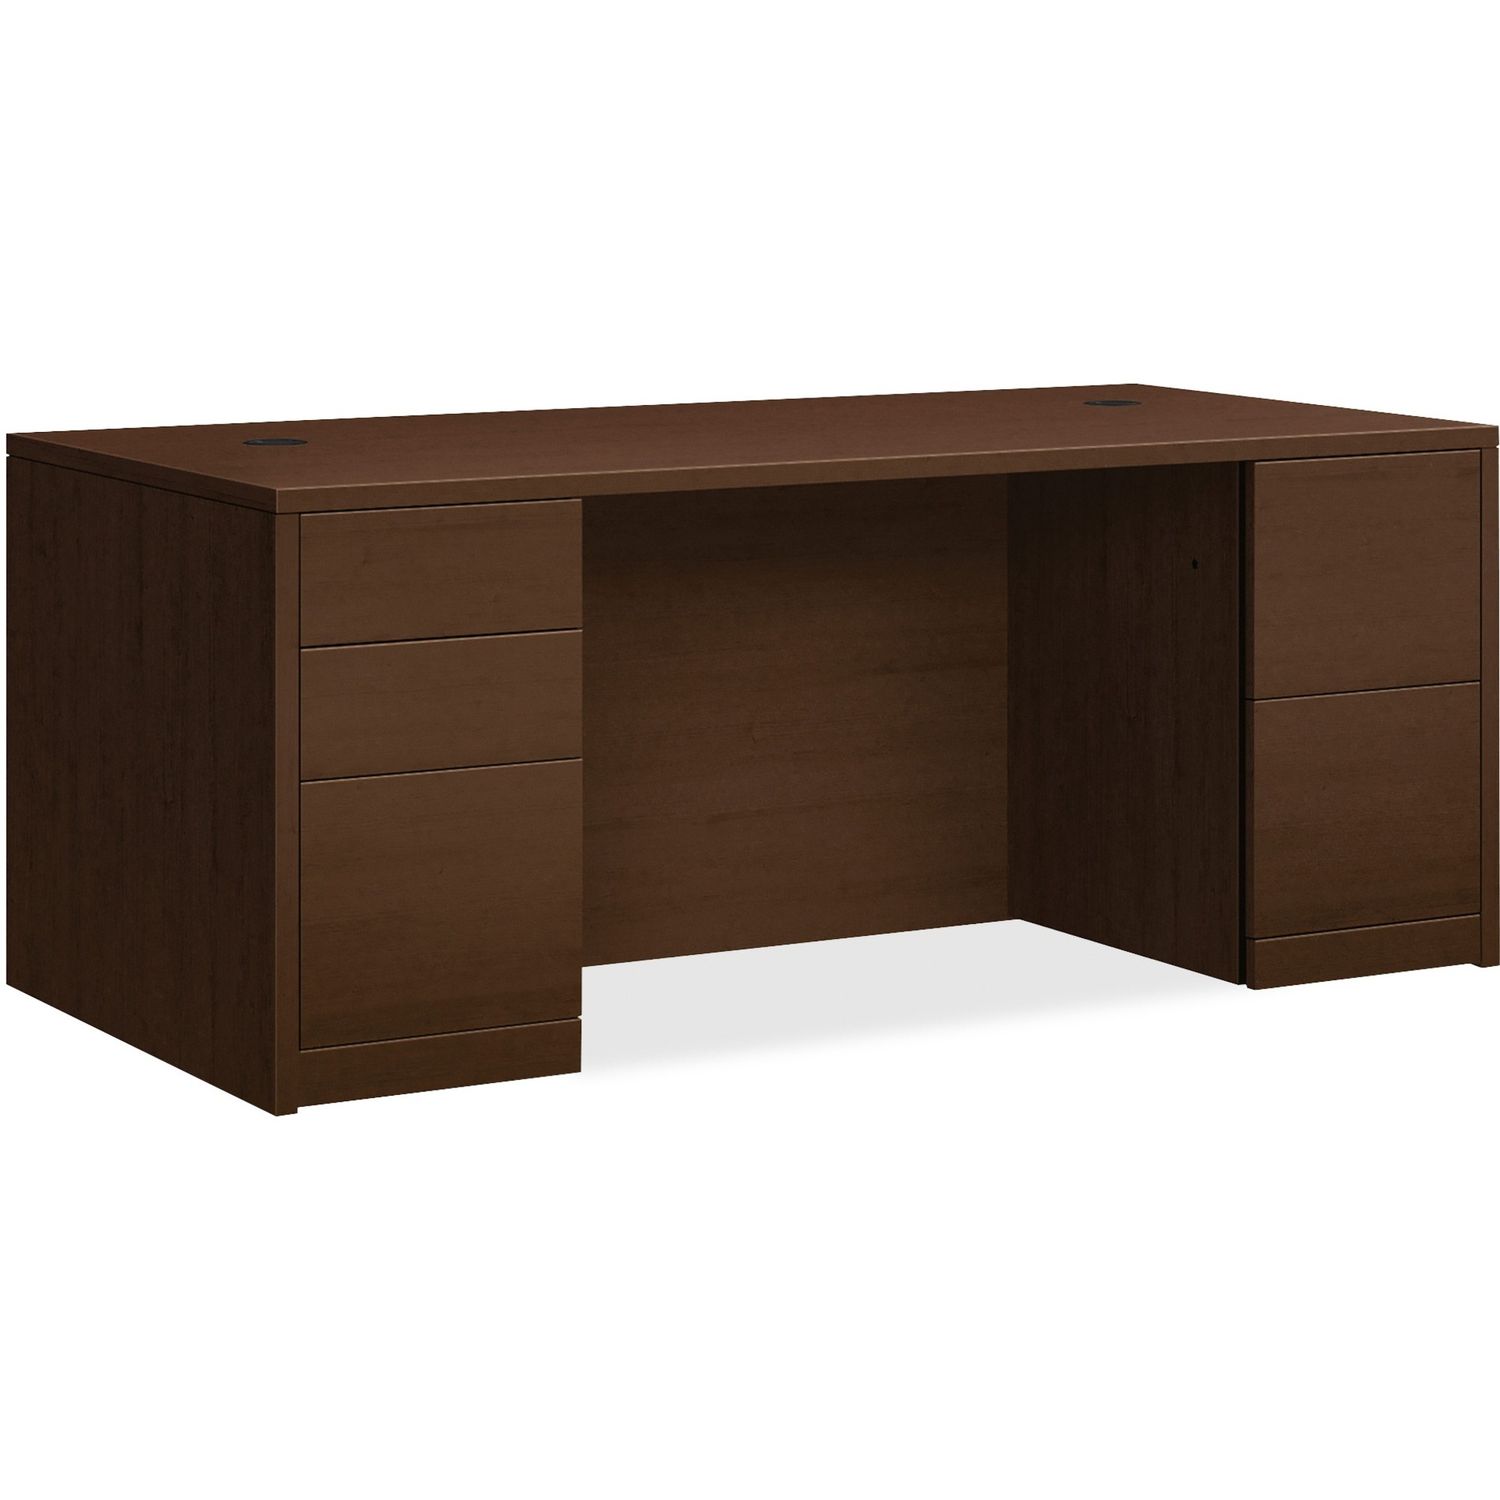 10500 Series Double Pedestal Desk - 5-Drawer 72" x 36" x 29.5" , 72" x 36"Work Surface, 1" Edge, 5 x Box Drawer(s), File Drawer(s), Double Pedestal on Left/Right Side, Smooth Edge